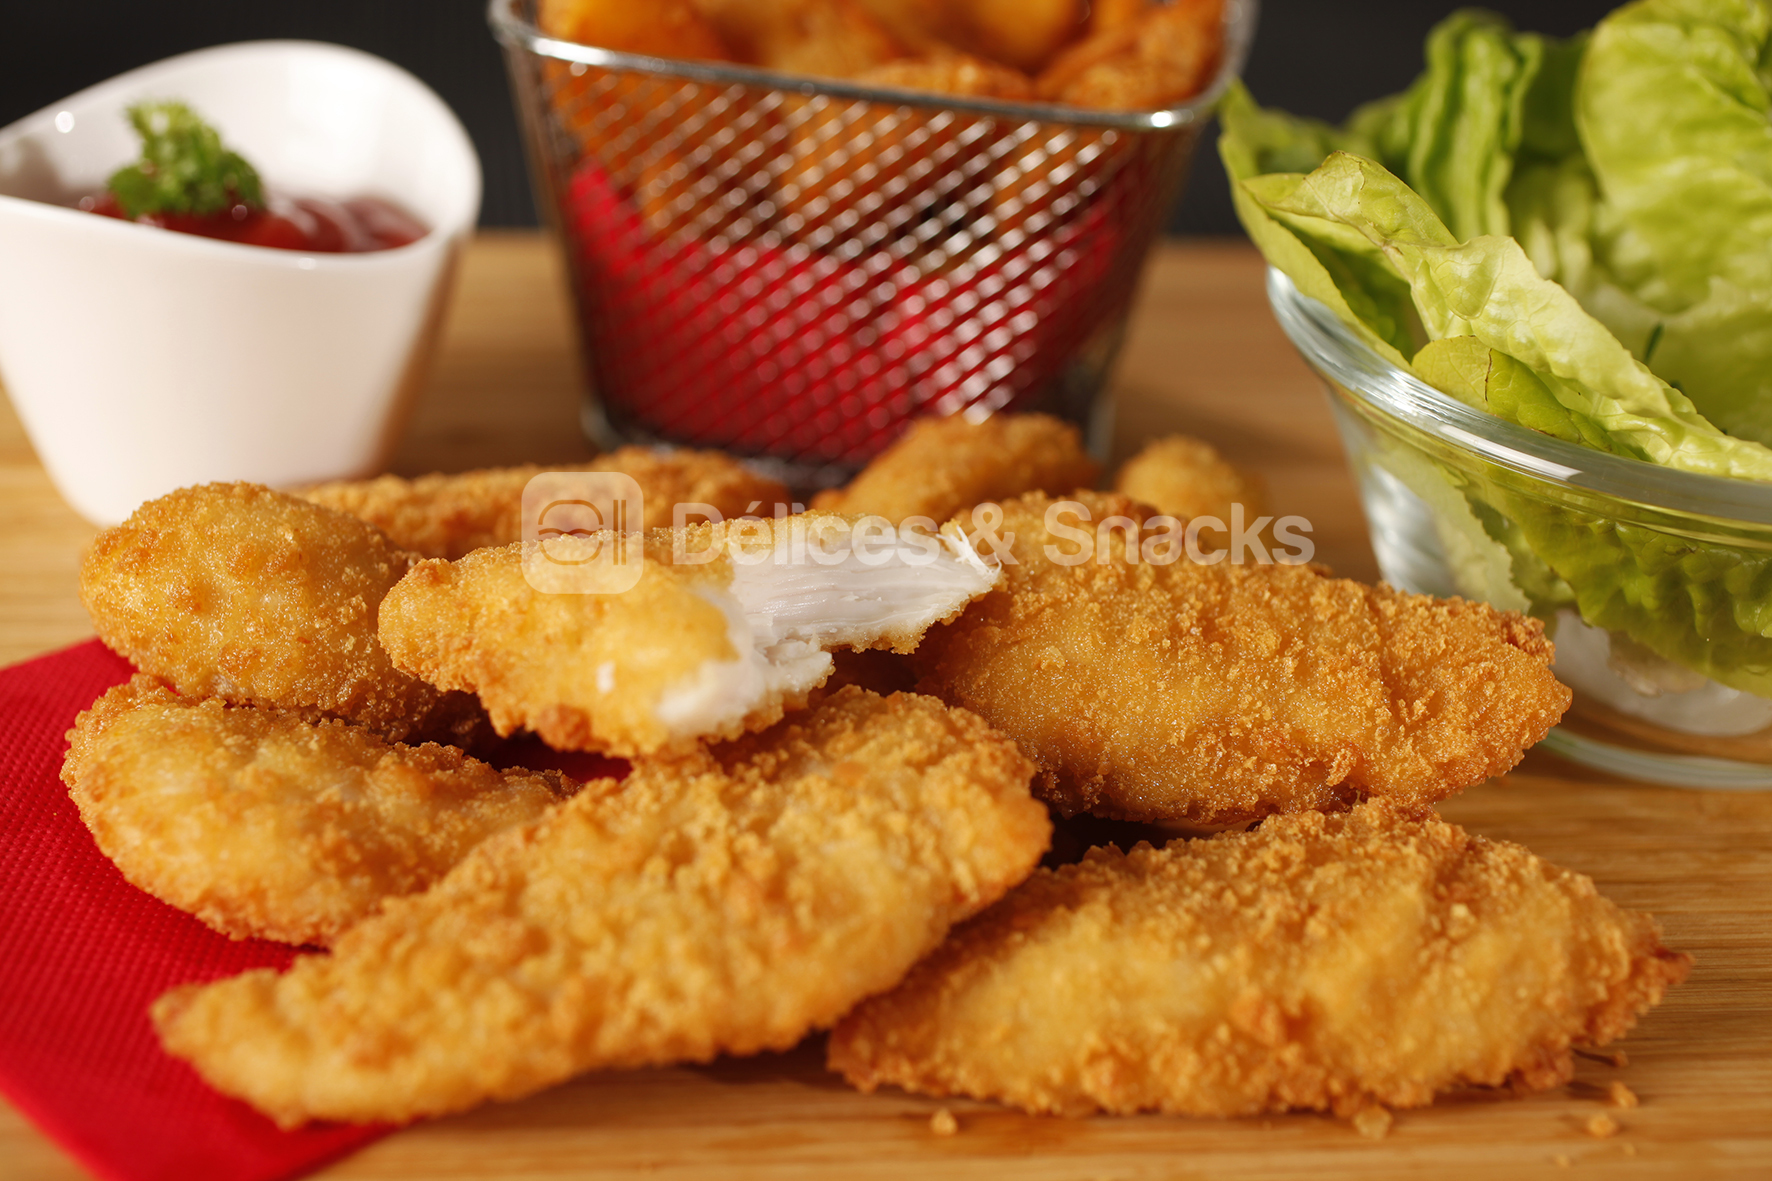 COOKED BREADED CHICKEN INNER FILLET (WHOLE MUSCLE) PREMIUM